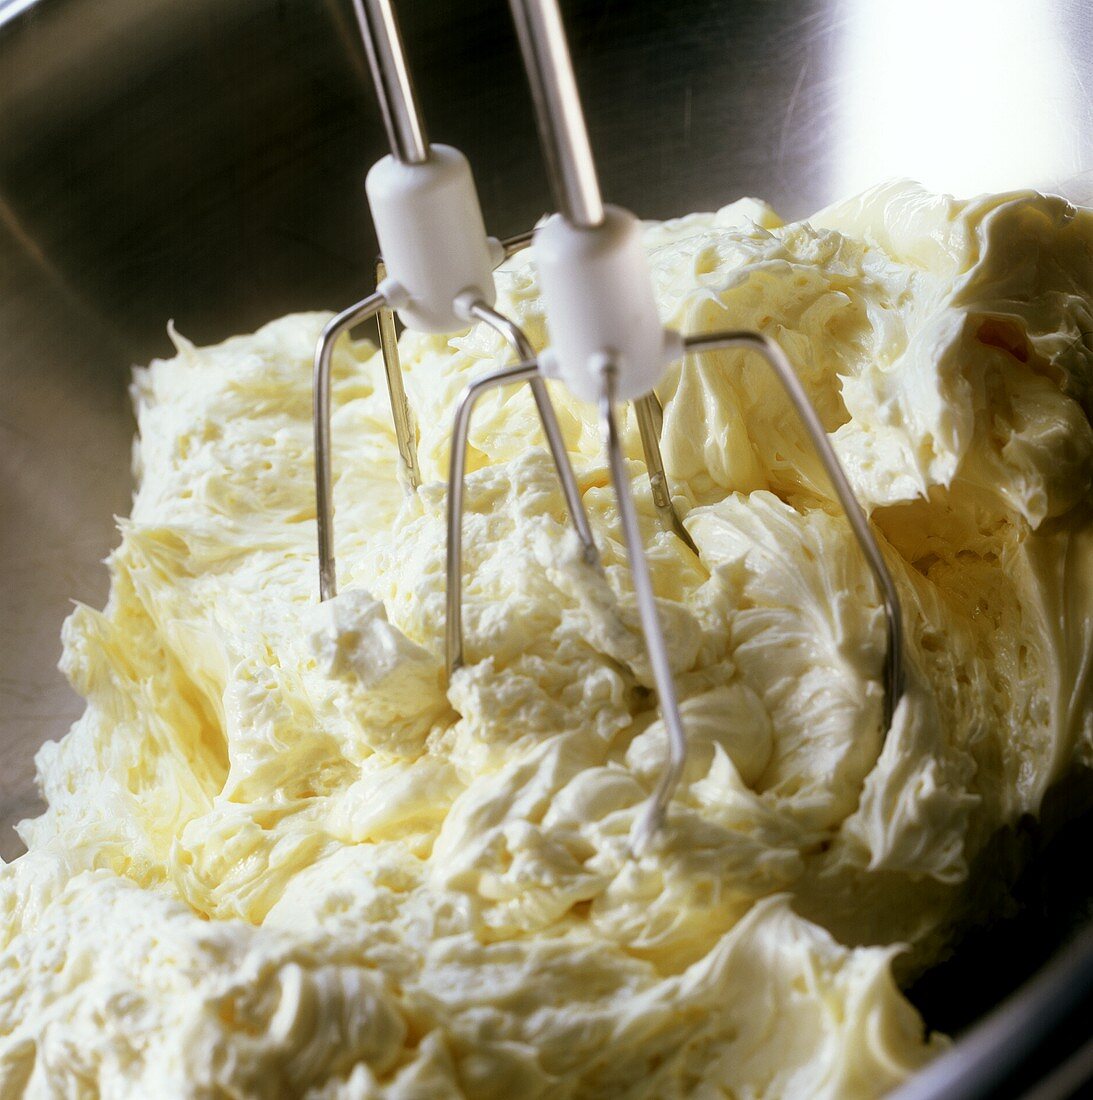 Making creamed cake mixture:creaming butter with hand mixer